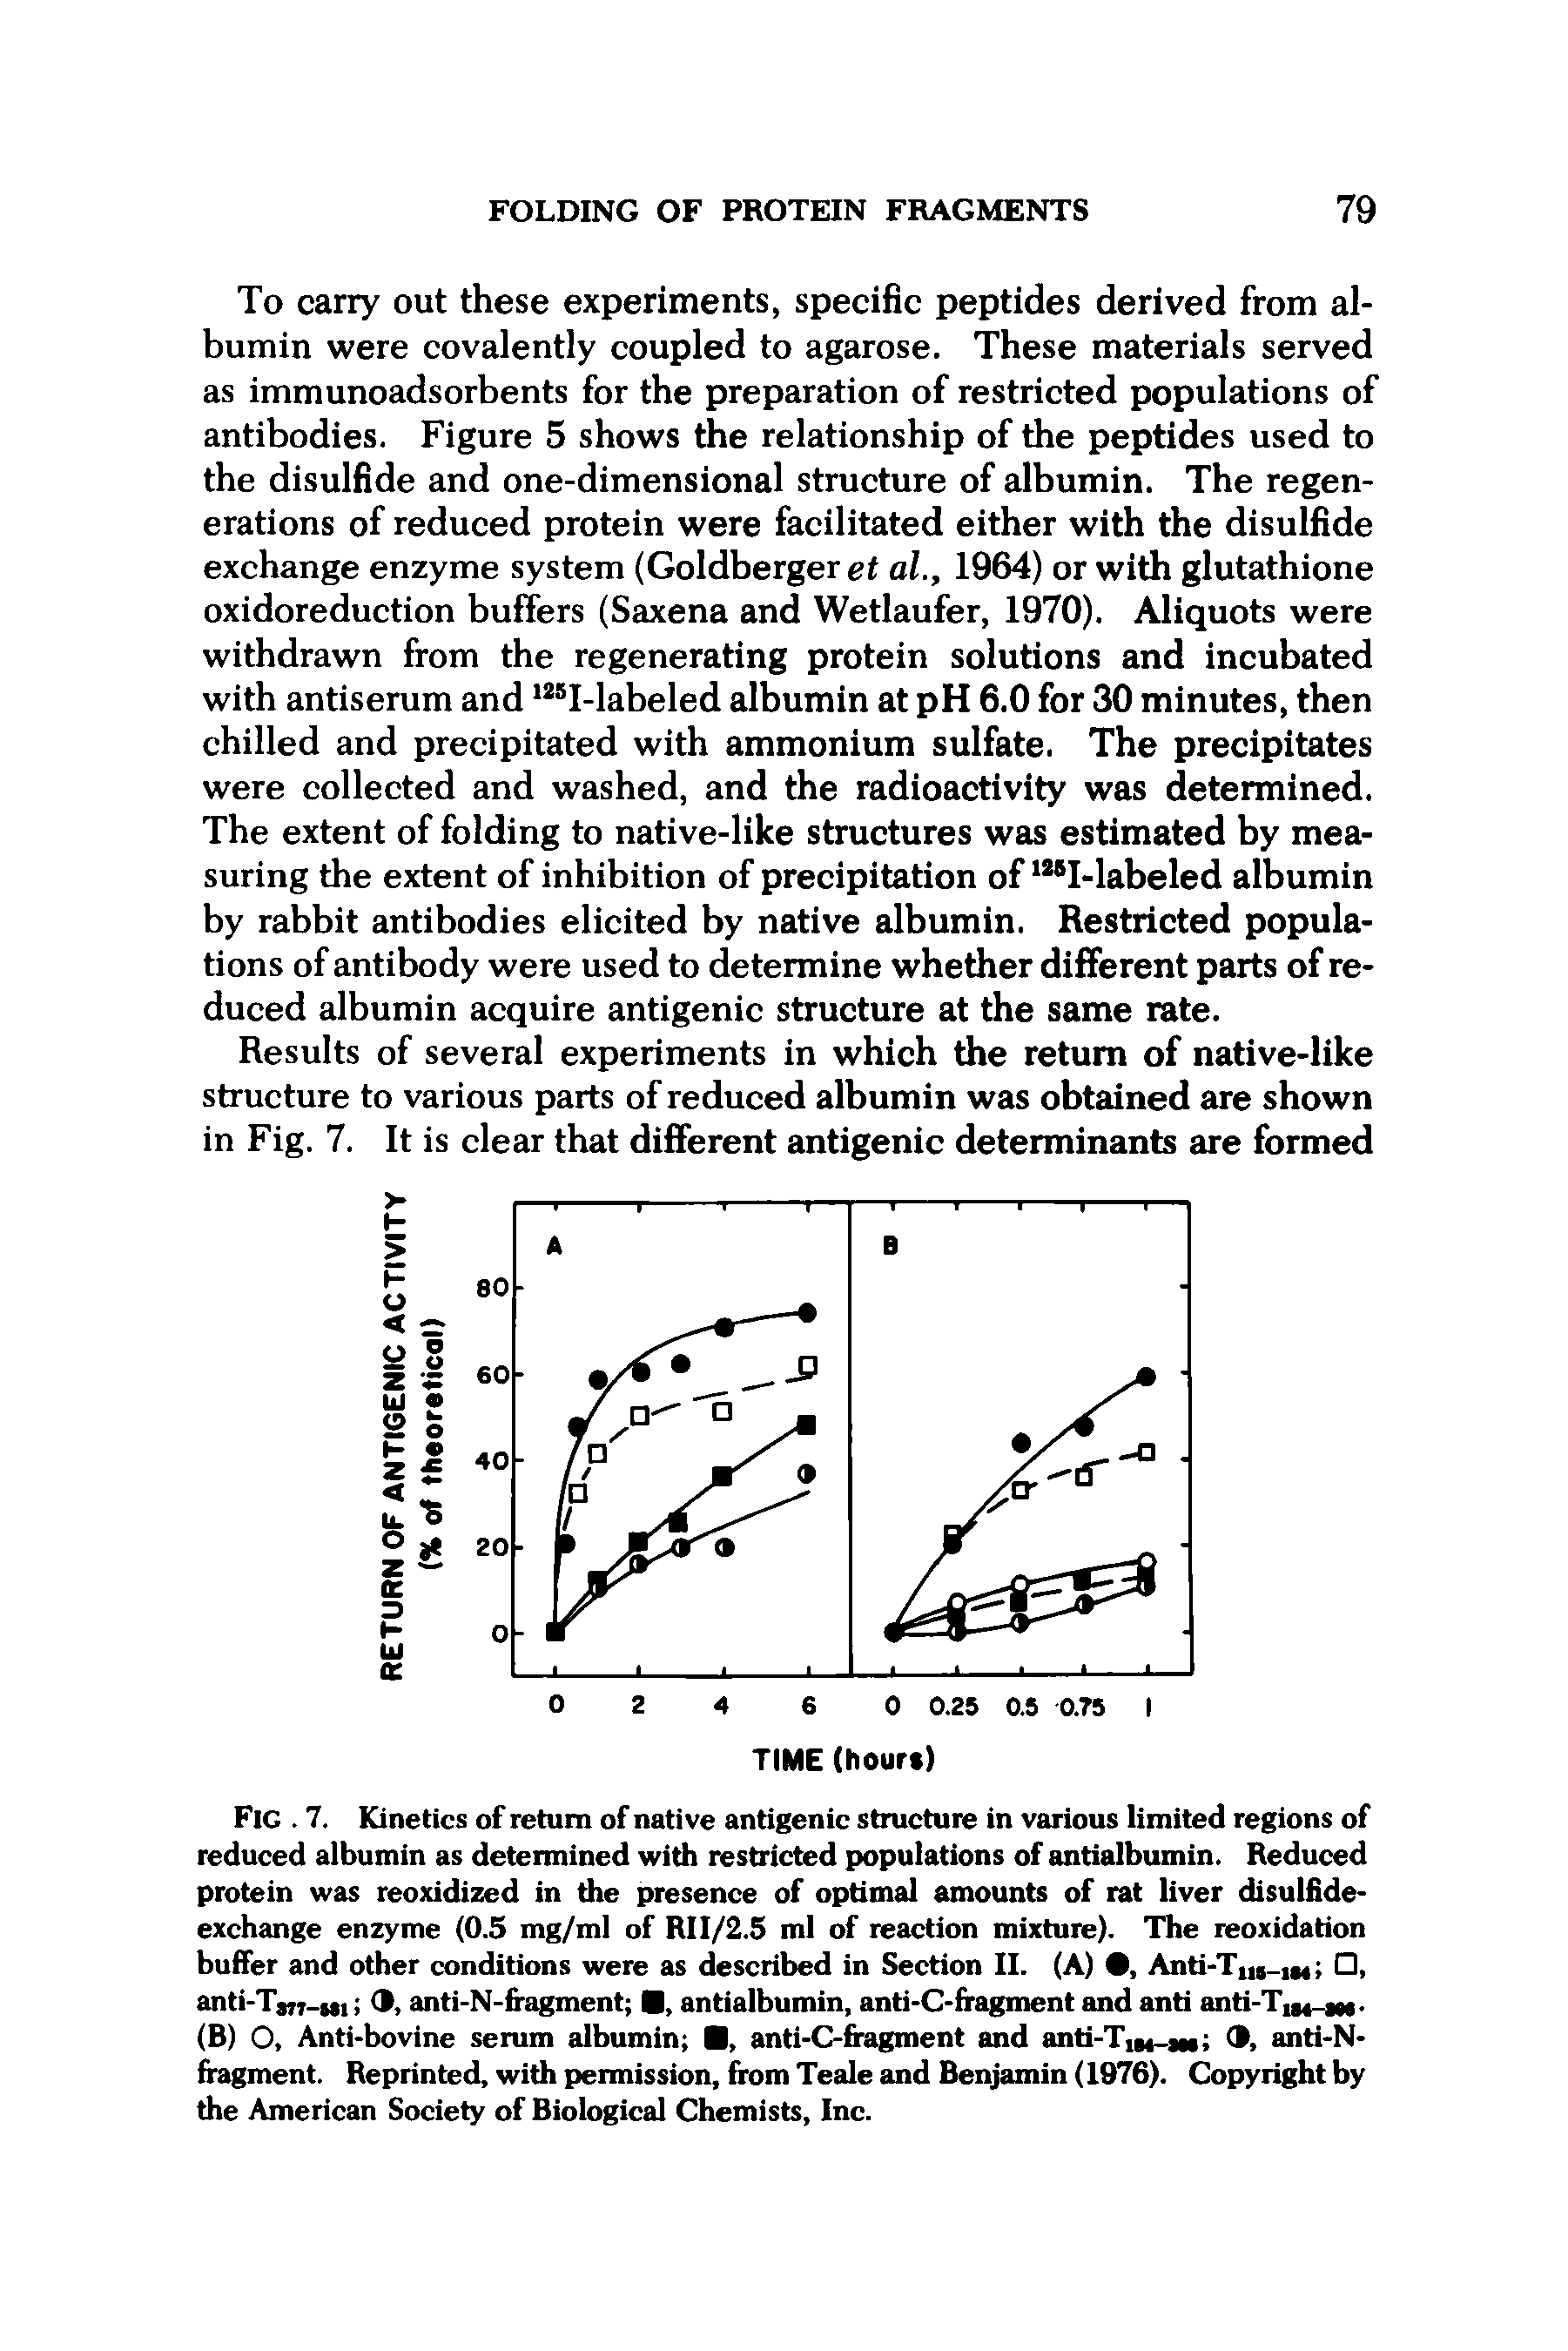 Fig. 7. Kinetics of return of native antigenic structure in various limited regions of reduced albumin as determined with restricted populations of antialbumin. Reduced protein was reoxidized in the presence of optimal amounts of rat liver disulfide-exchange enzyme (0.5 mg/ml of RII/2.5 ml of reaction mixture). The reoxidation buffer and other conditions were as described in Section II. (A) 0, Anti-T 5 1M , anti- Tstt-mi anti-N-fragment antialbumin, anti-C-ffagment and anti anti-T,M, j.